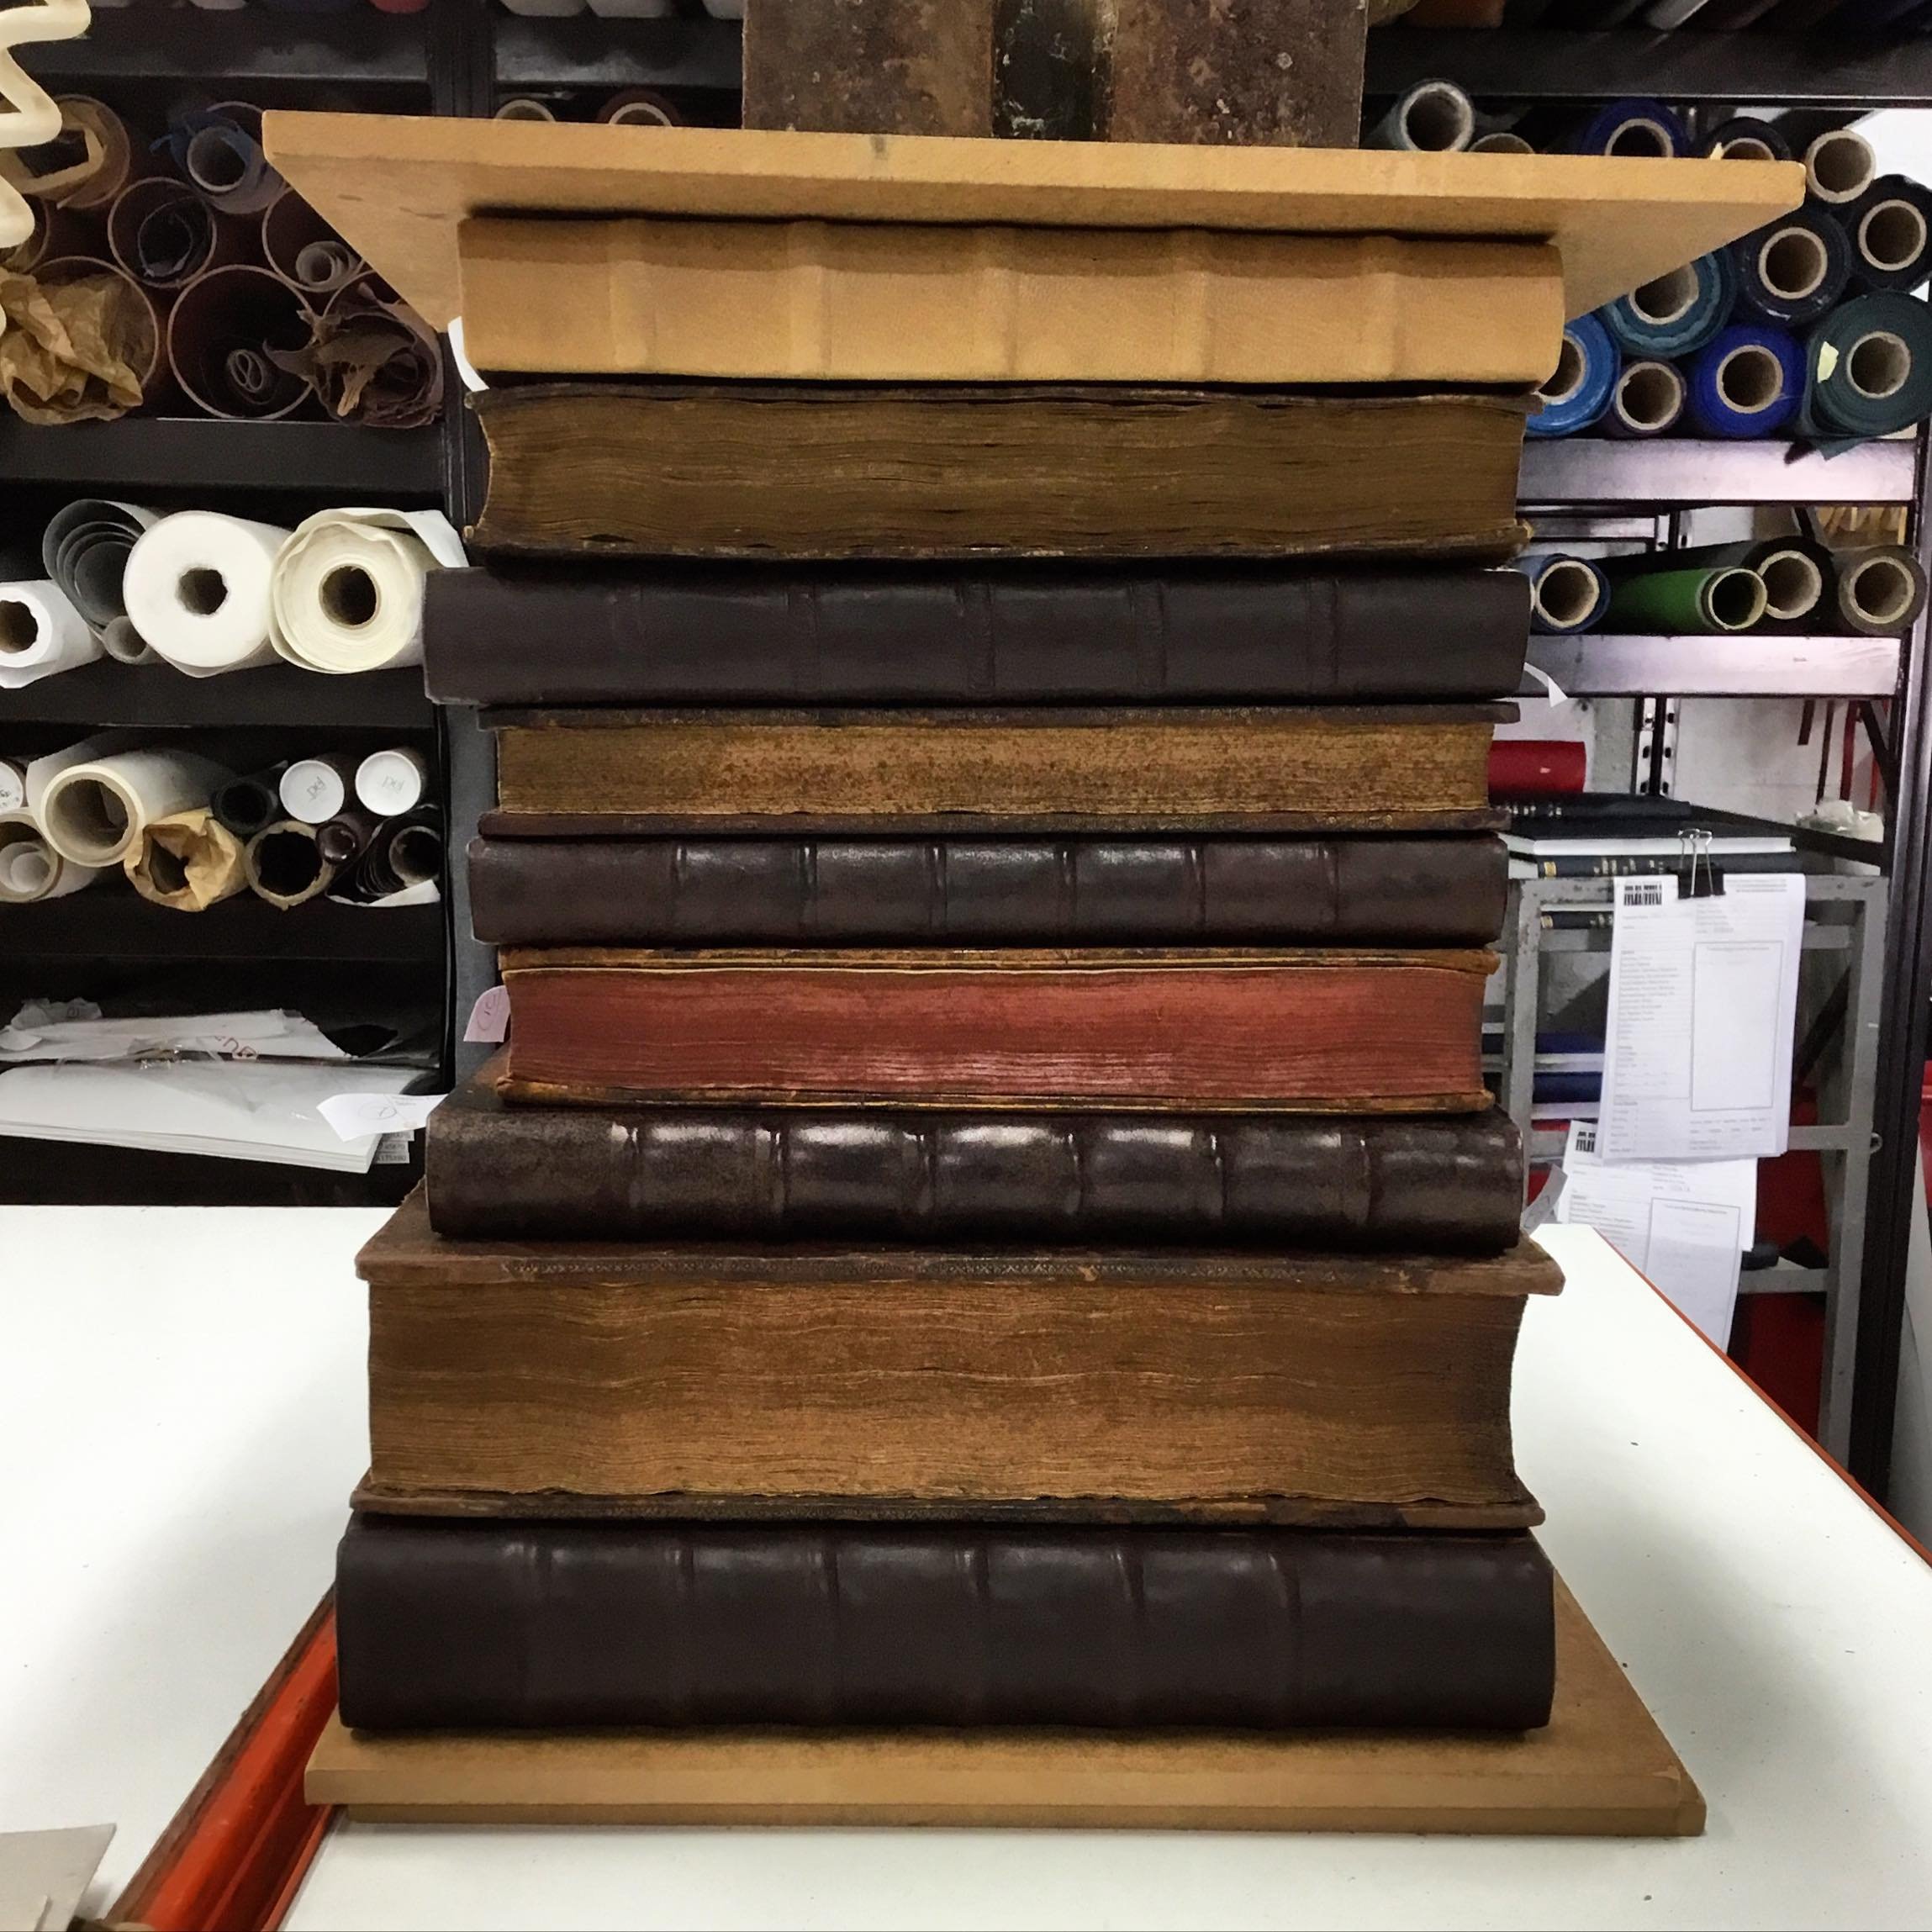 This week a set of books from the 1600s are in the shop for leather repairs. Now they&rsquo;re set to last another 400 years!

#bookrepair #bookrestoration #repairshop #conservation #bookconservation #leatherbooks #dadbookbinders